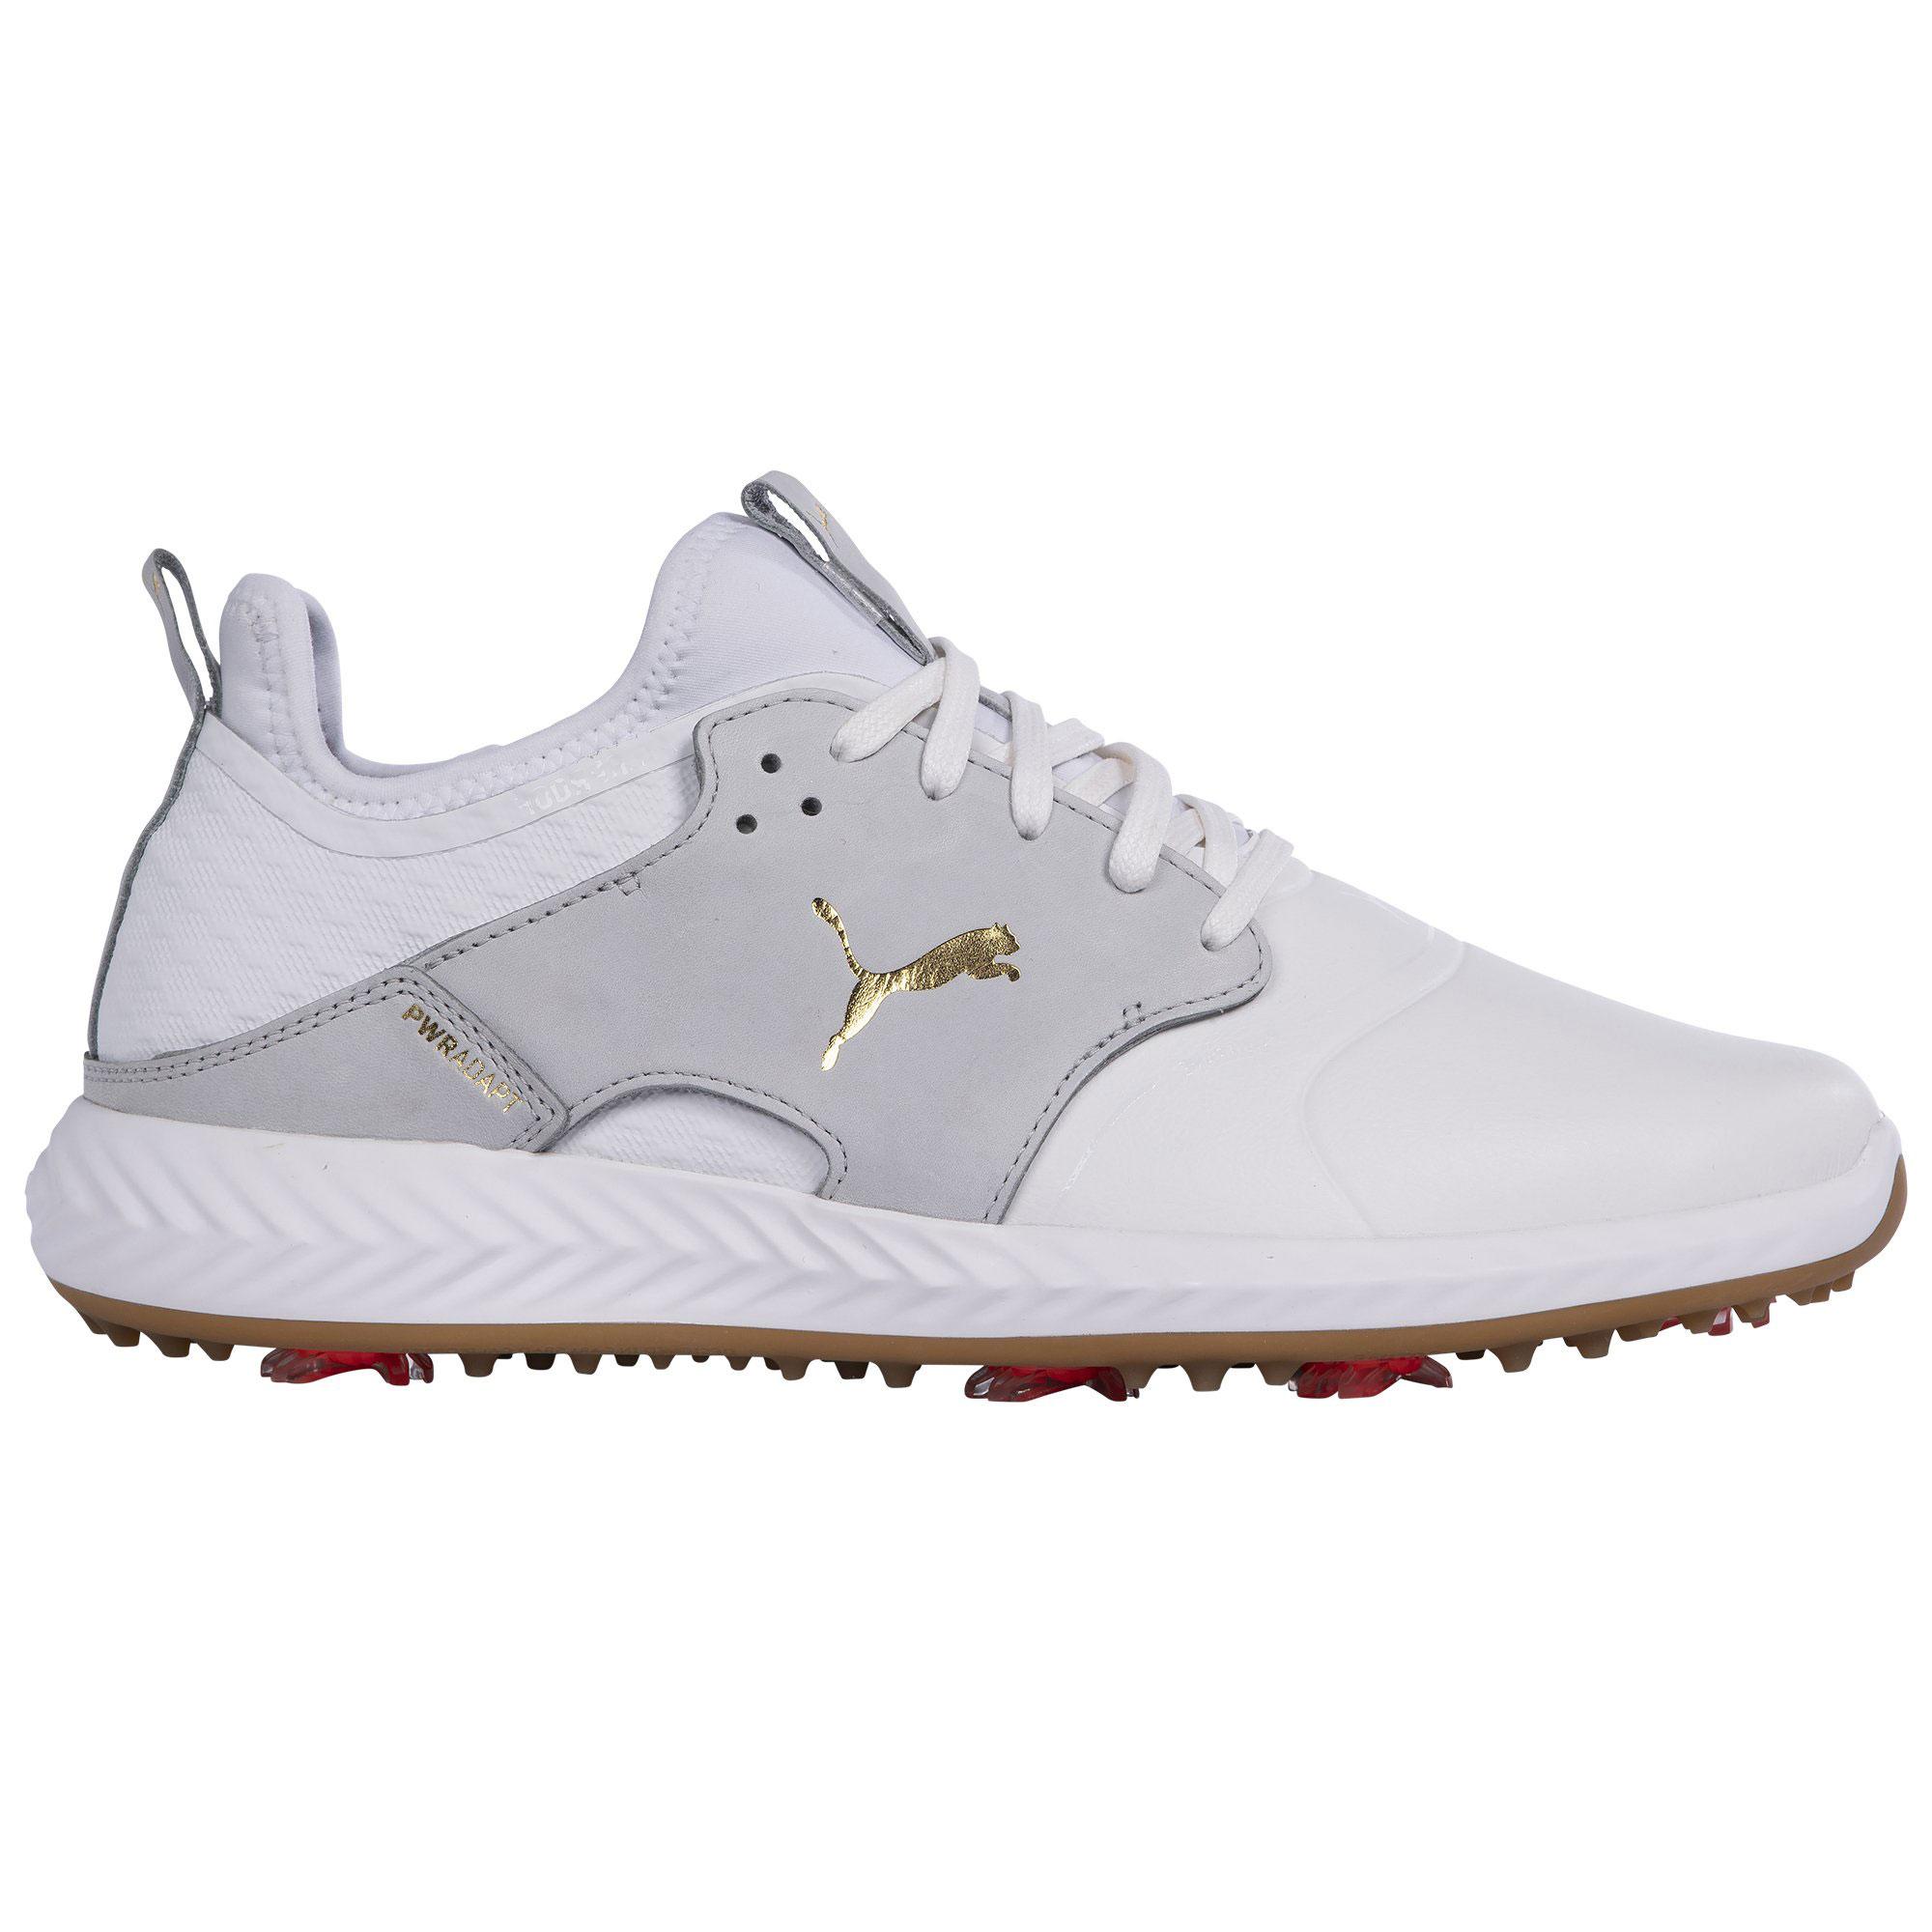 Loosely miracle Confine puma golf shoes uk violation do not do I complain